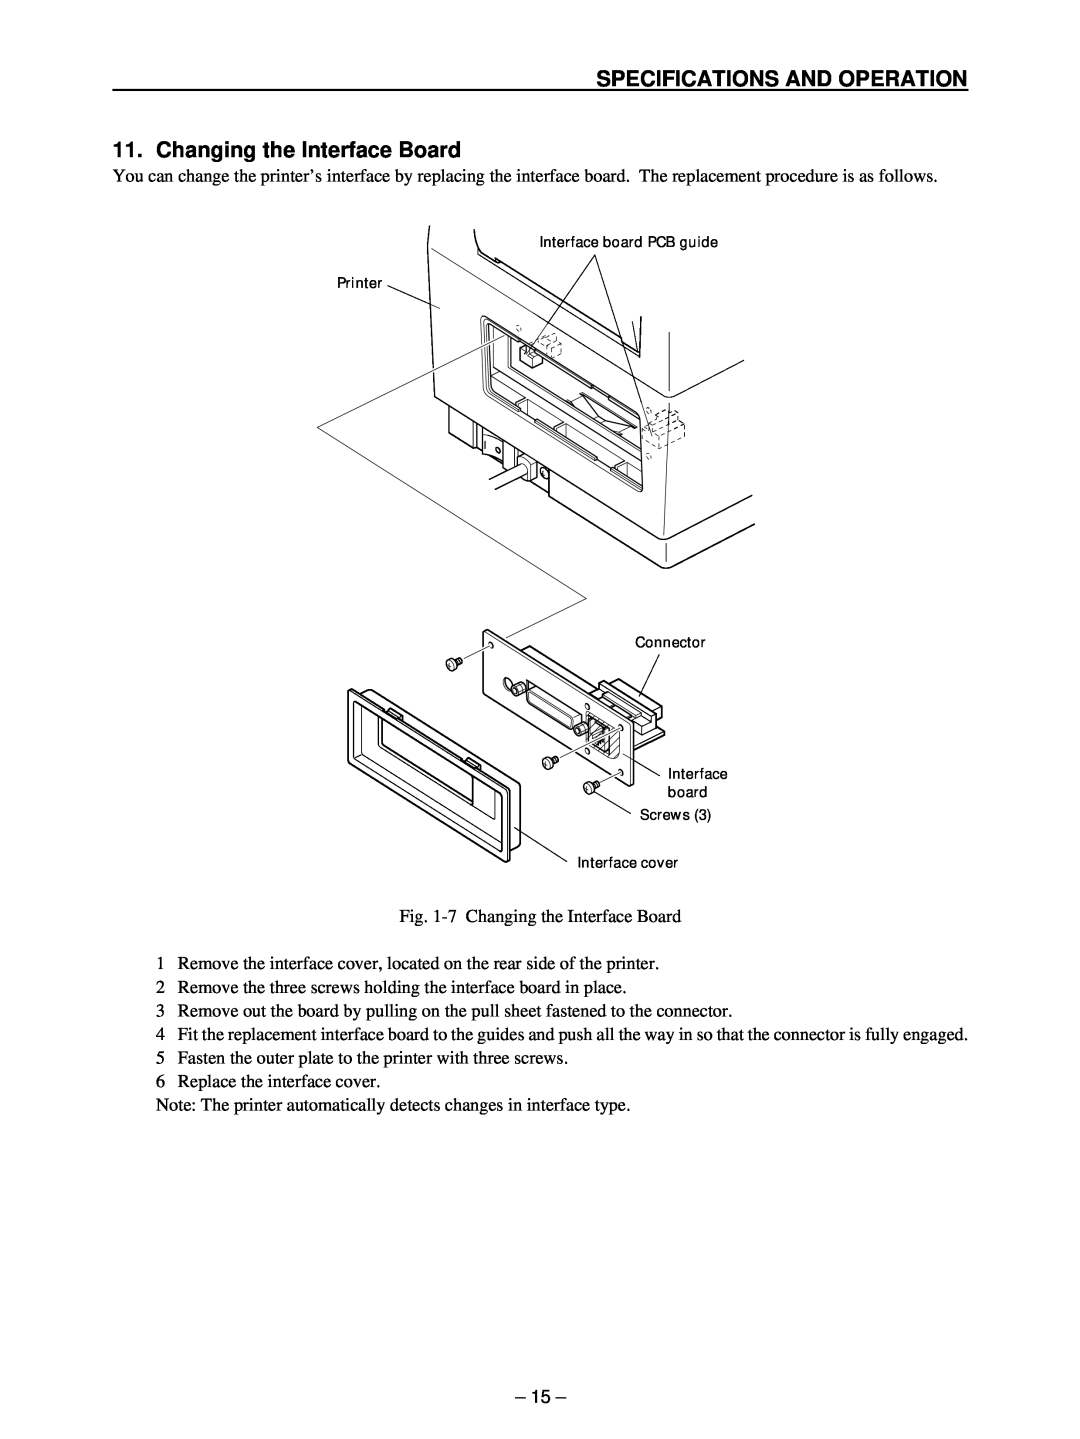 Star Micronics TSP400 technical manual SPECIFICATIONS AND OPERATION 11. Changing the Interface Board 